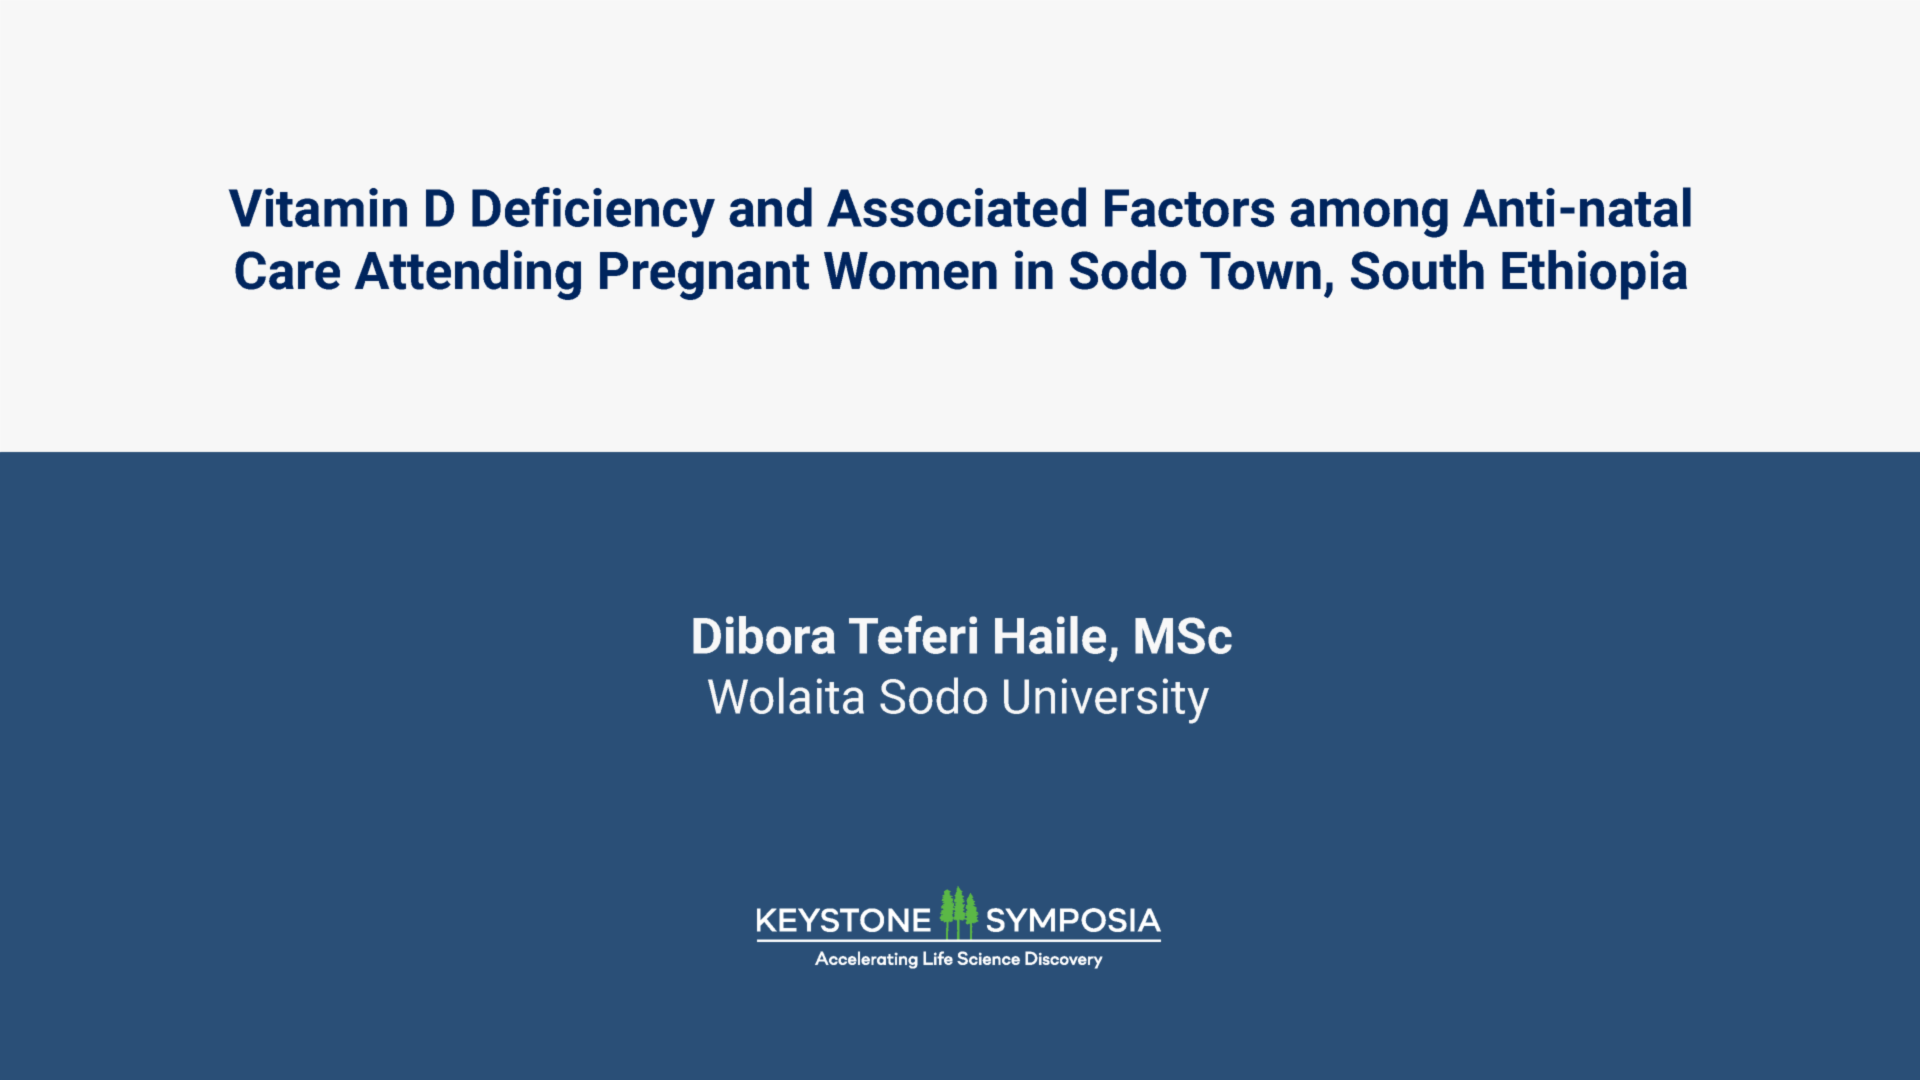 Vitamin D Deficiency and Associated Factors among Anti-natal Care Attending Pregnant Women in Sodo Town, South Ethiopia icon